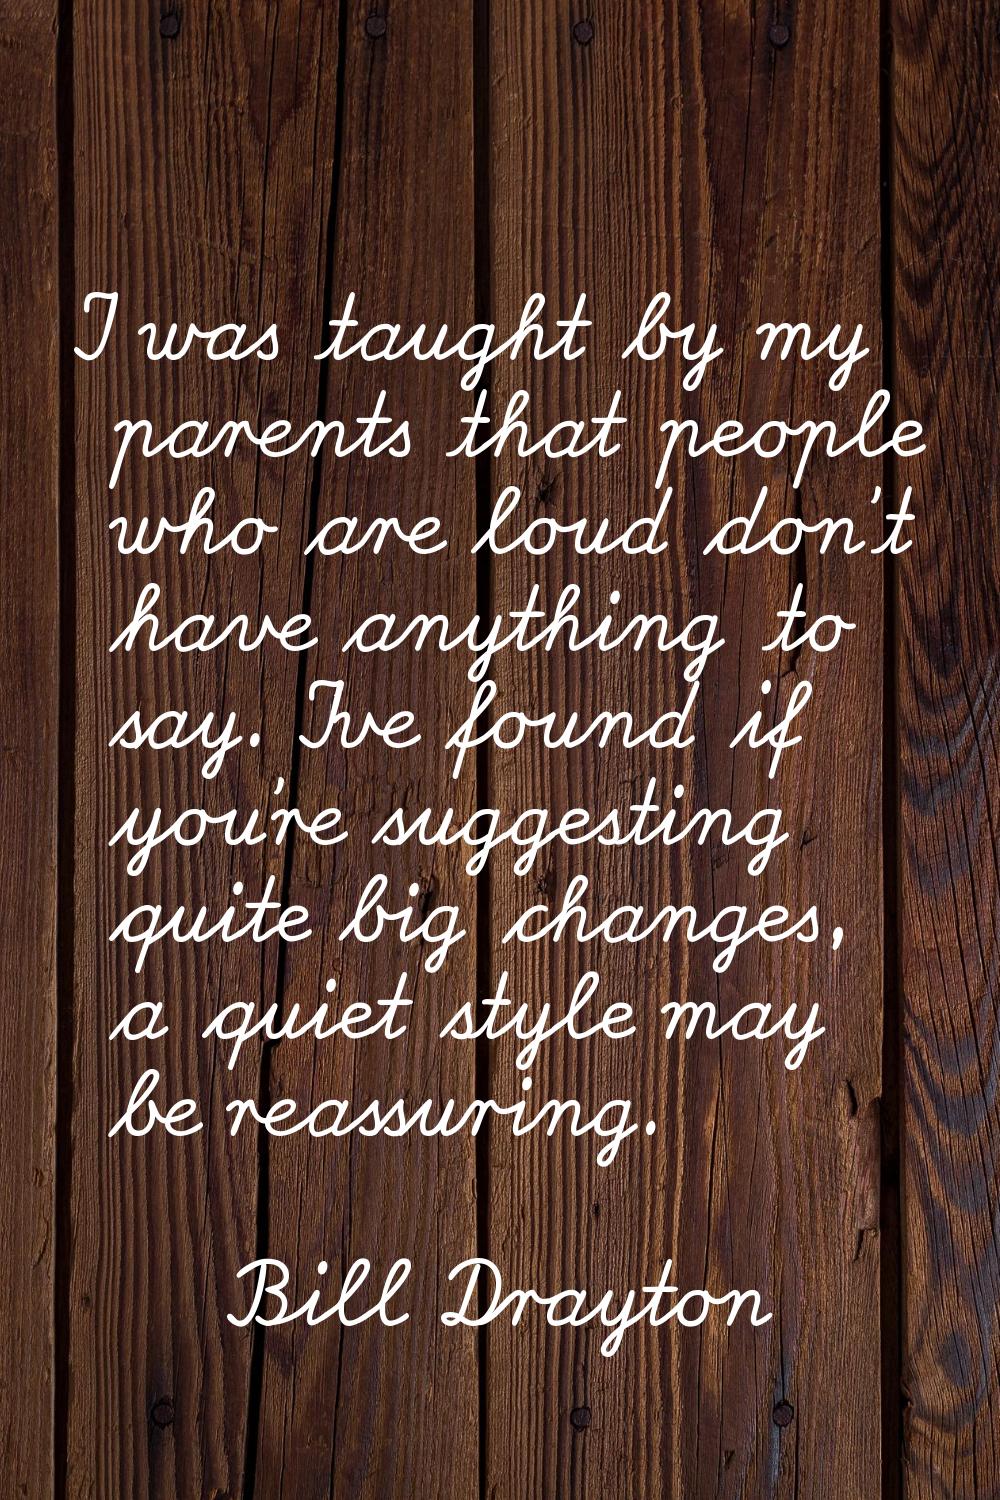 I was taught by my parents that people who are loud don't have anything to say. I've found if you'r